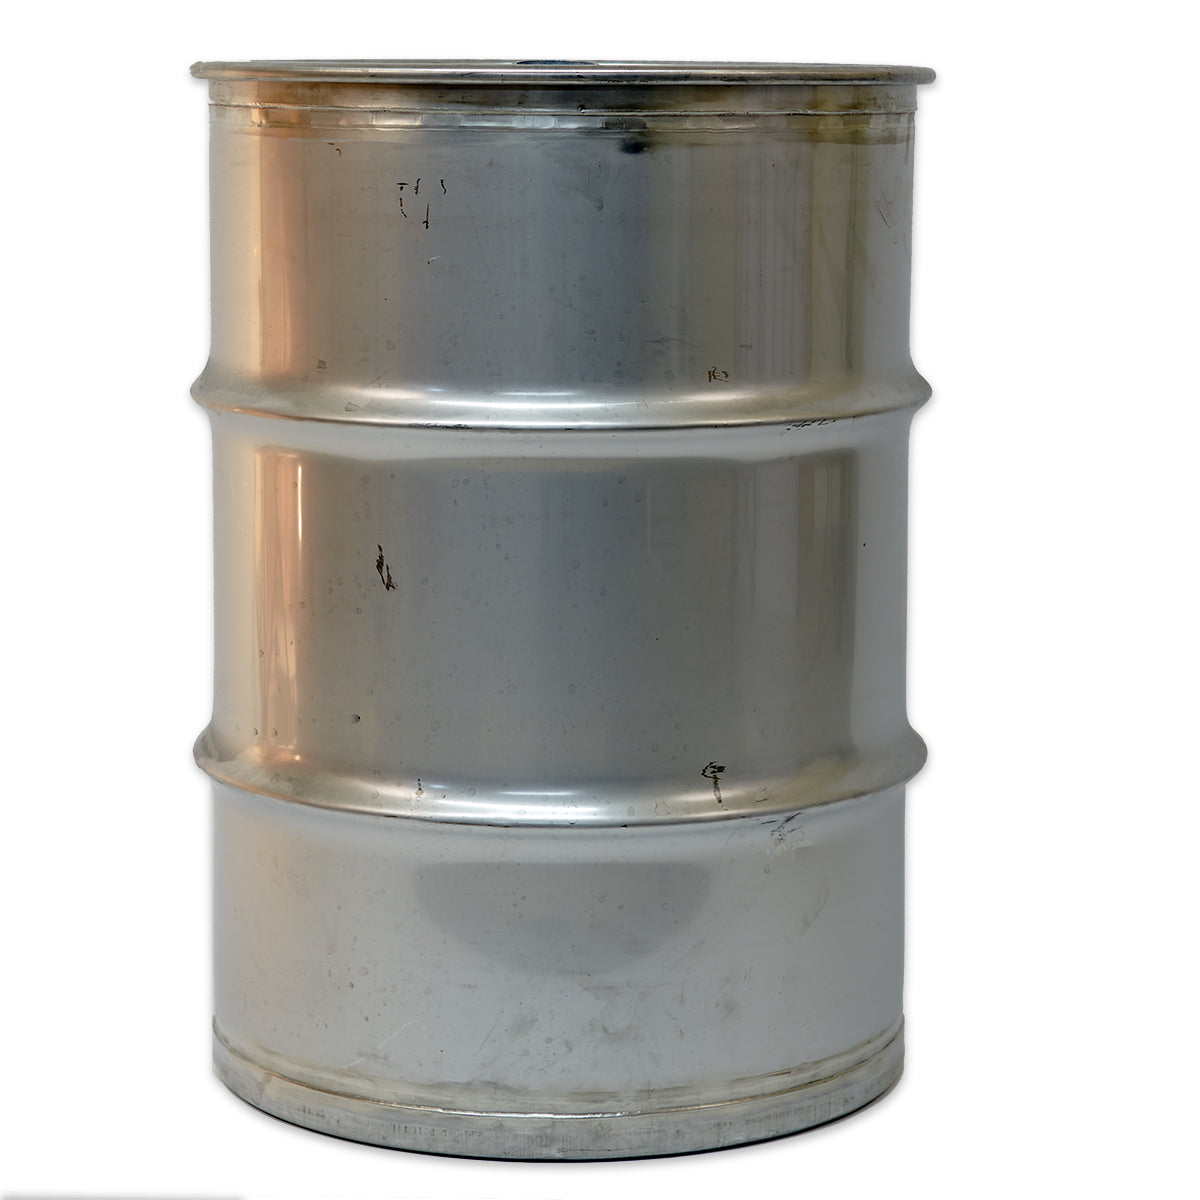 40 Gallon Stainless Steel Drum w/One Top Bung